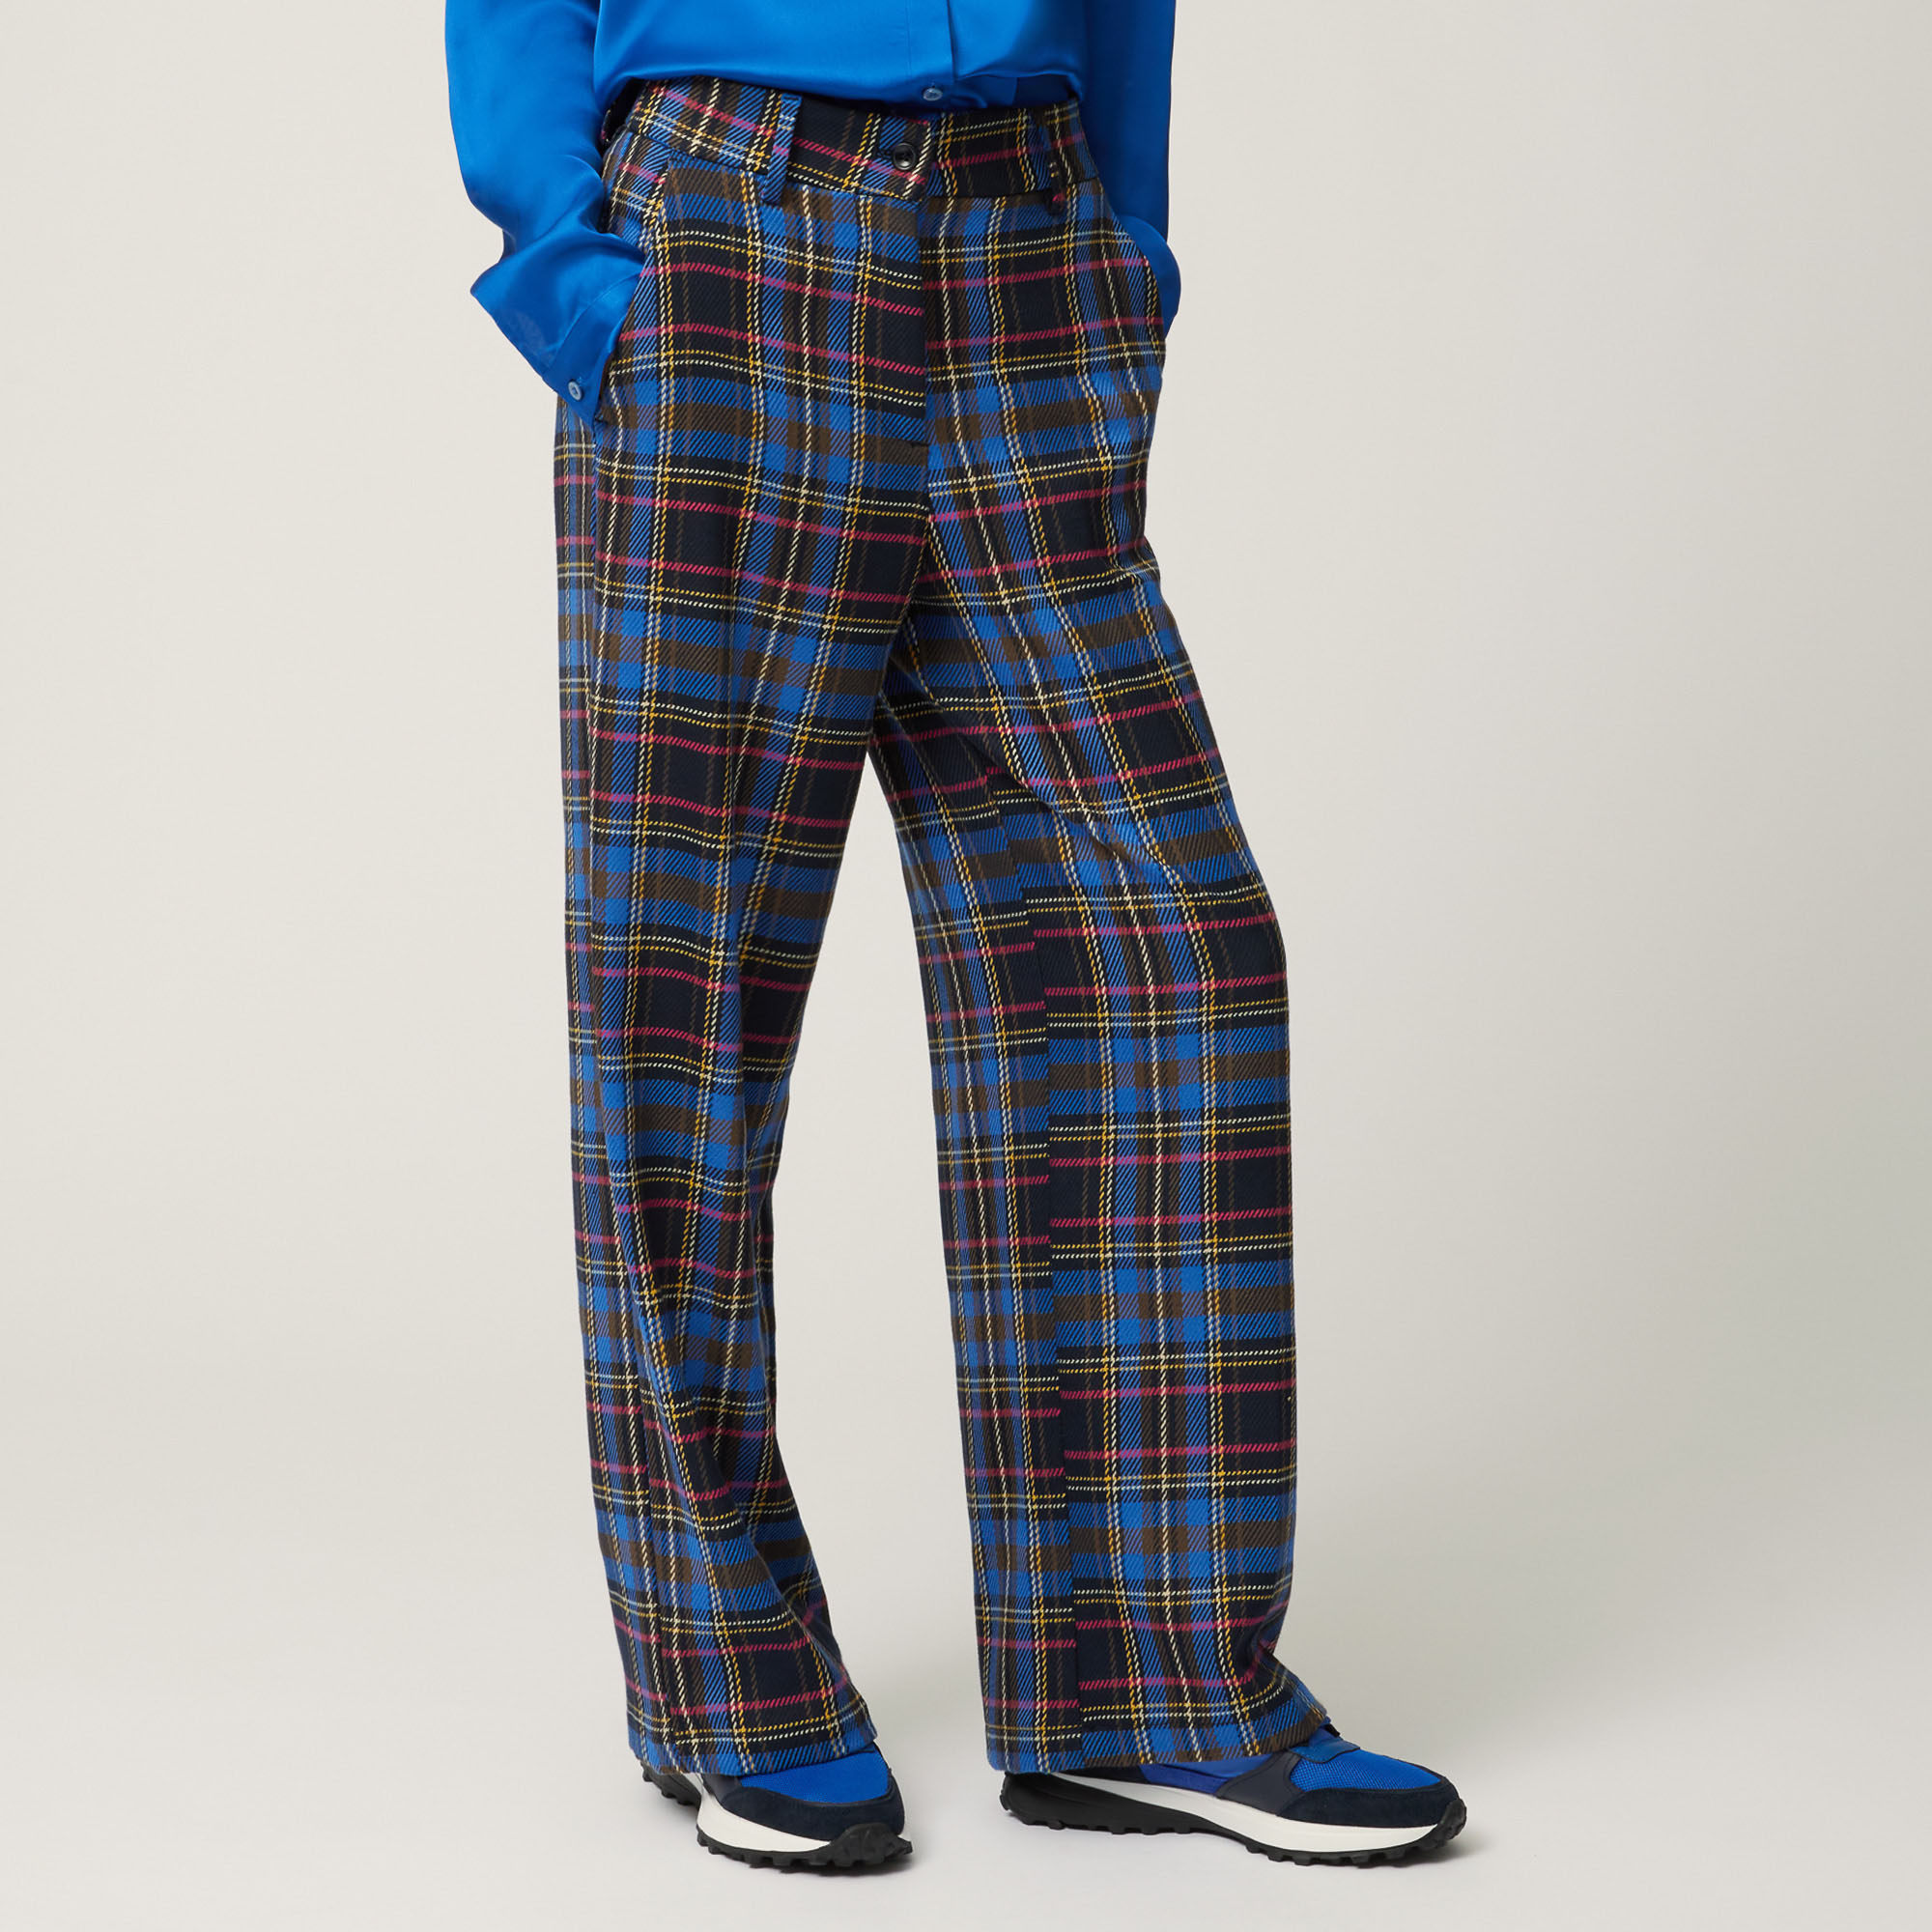 High-Waist Pants With Chequered Pattern, Blue, large image number 0